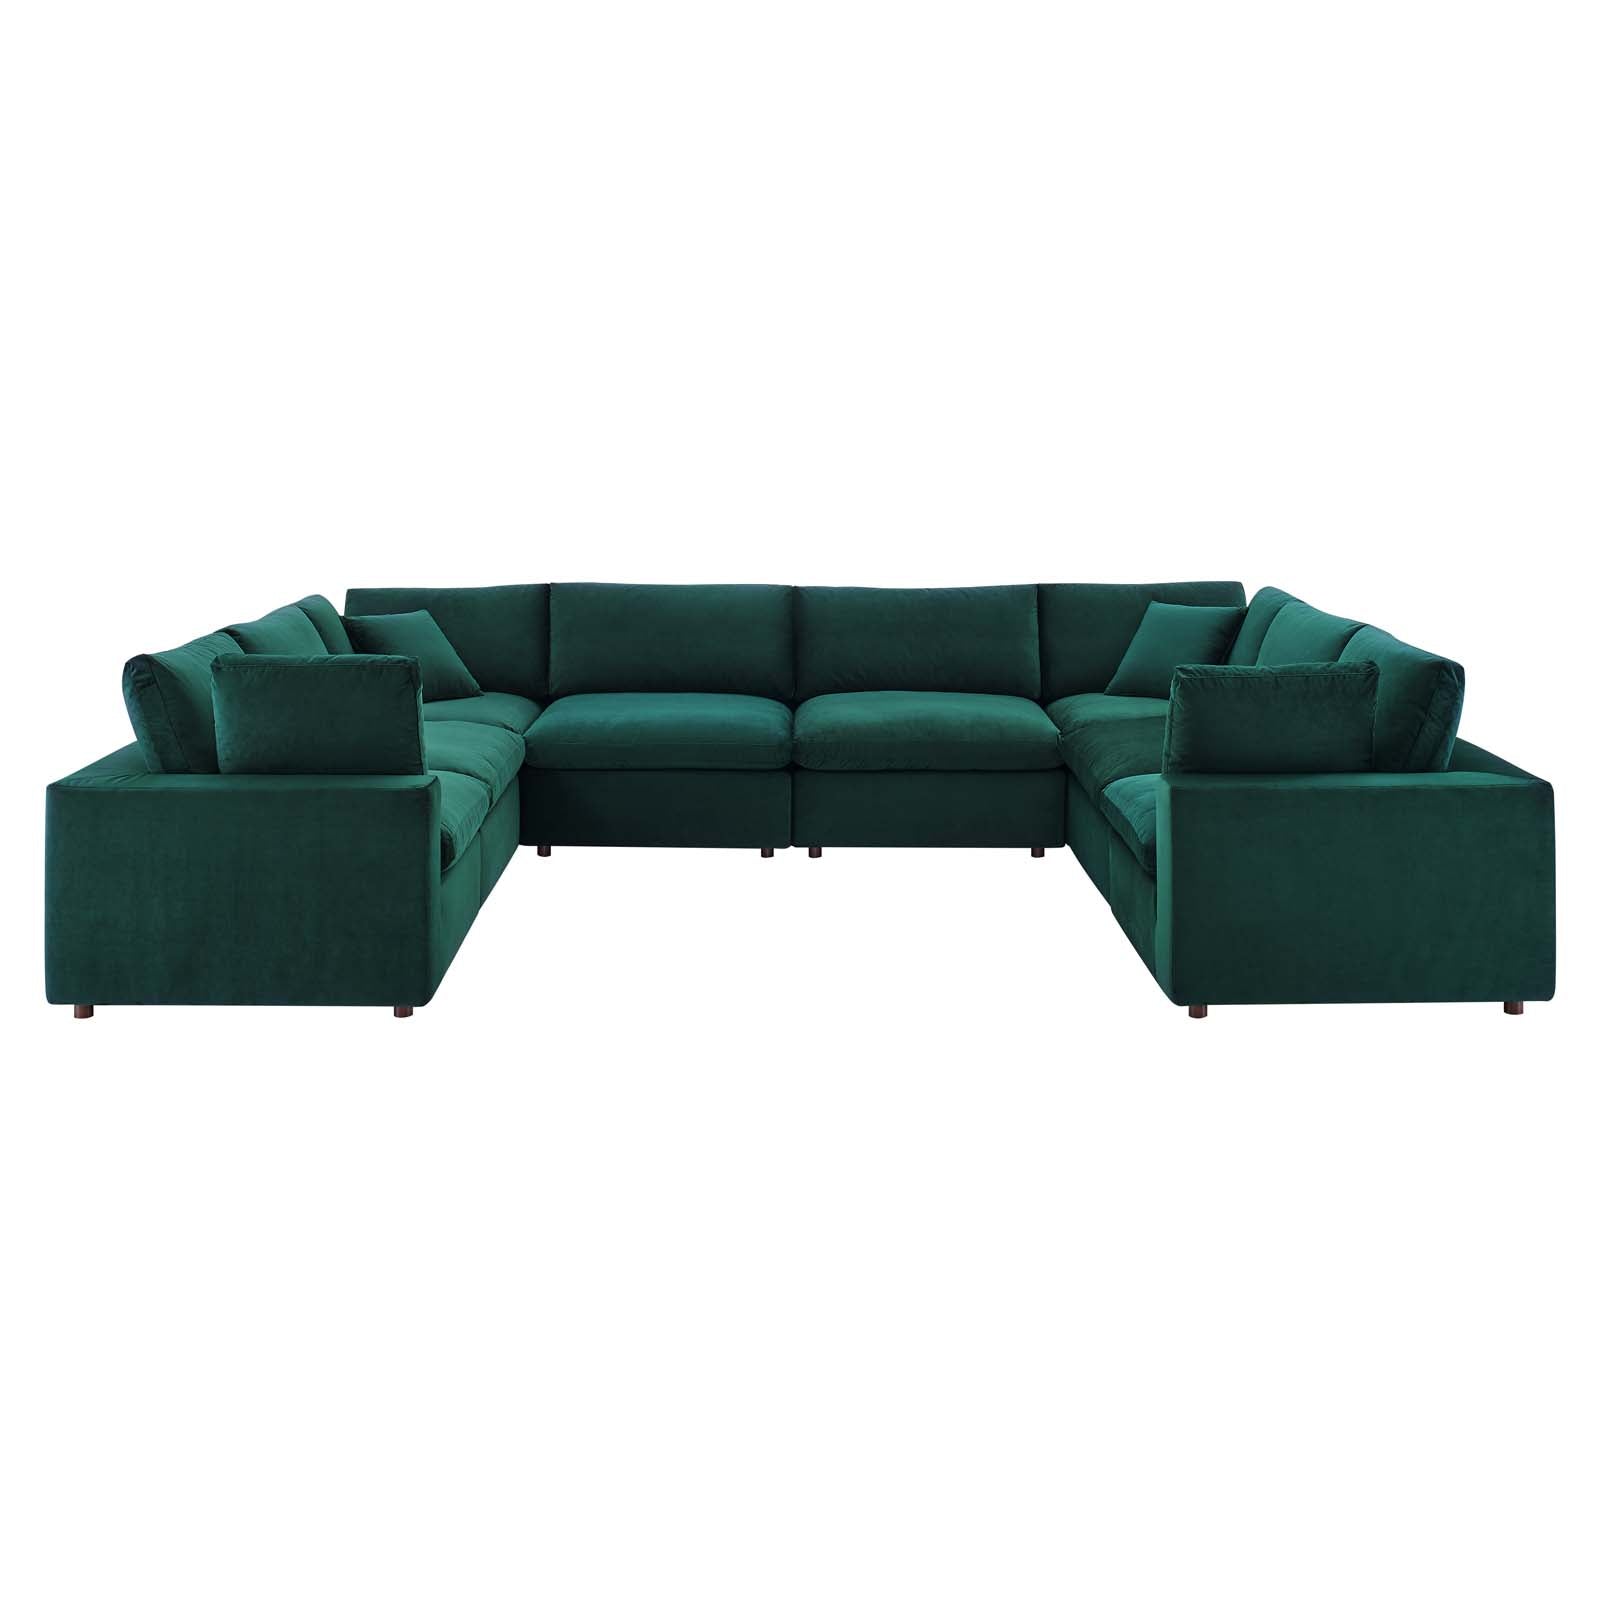 Commix Down Filled Overstuffed Performance Velvet 8-Piece Sectional Sofa